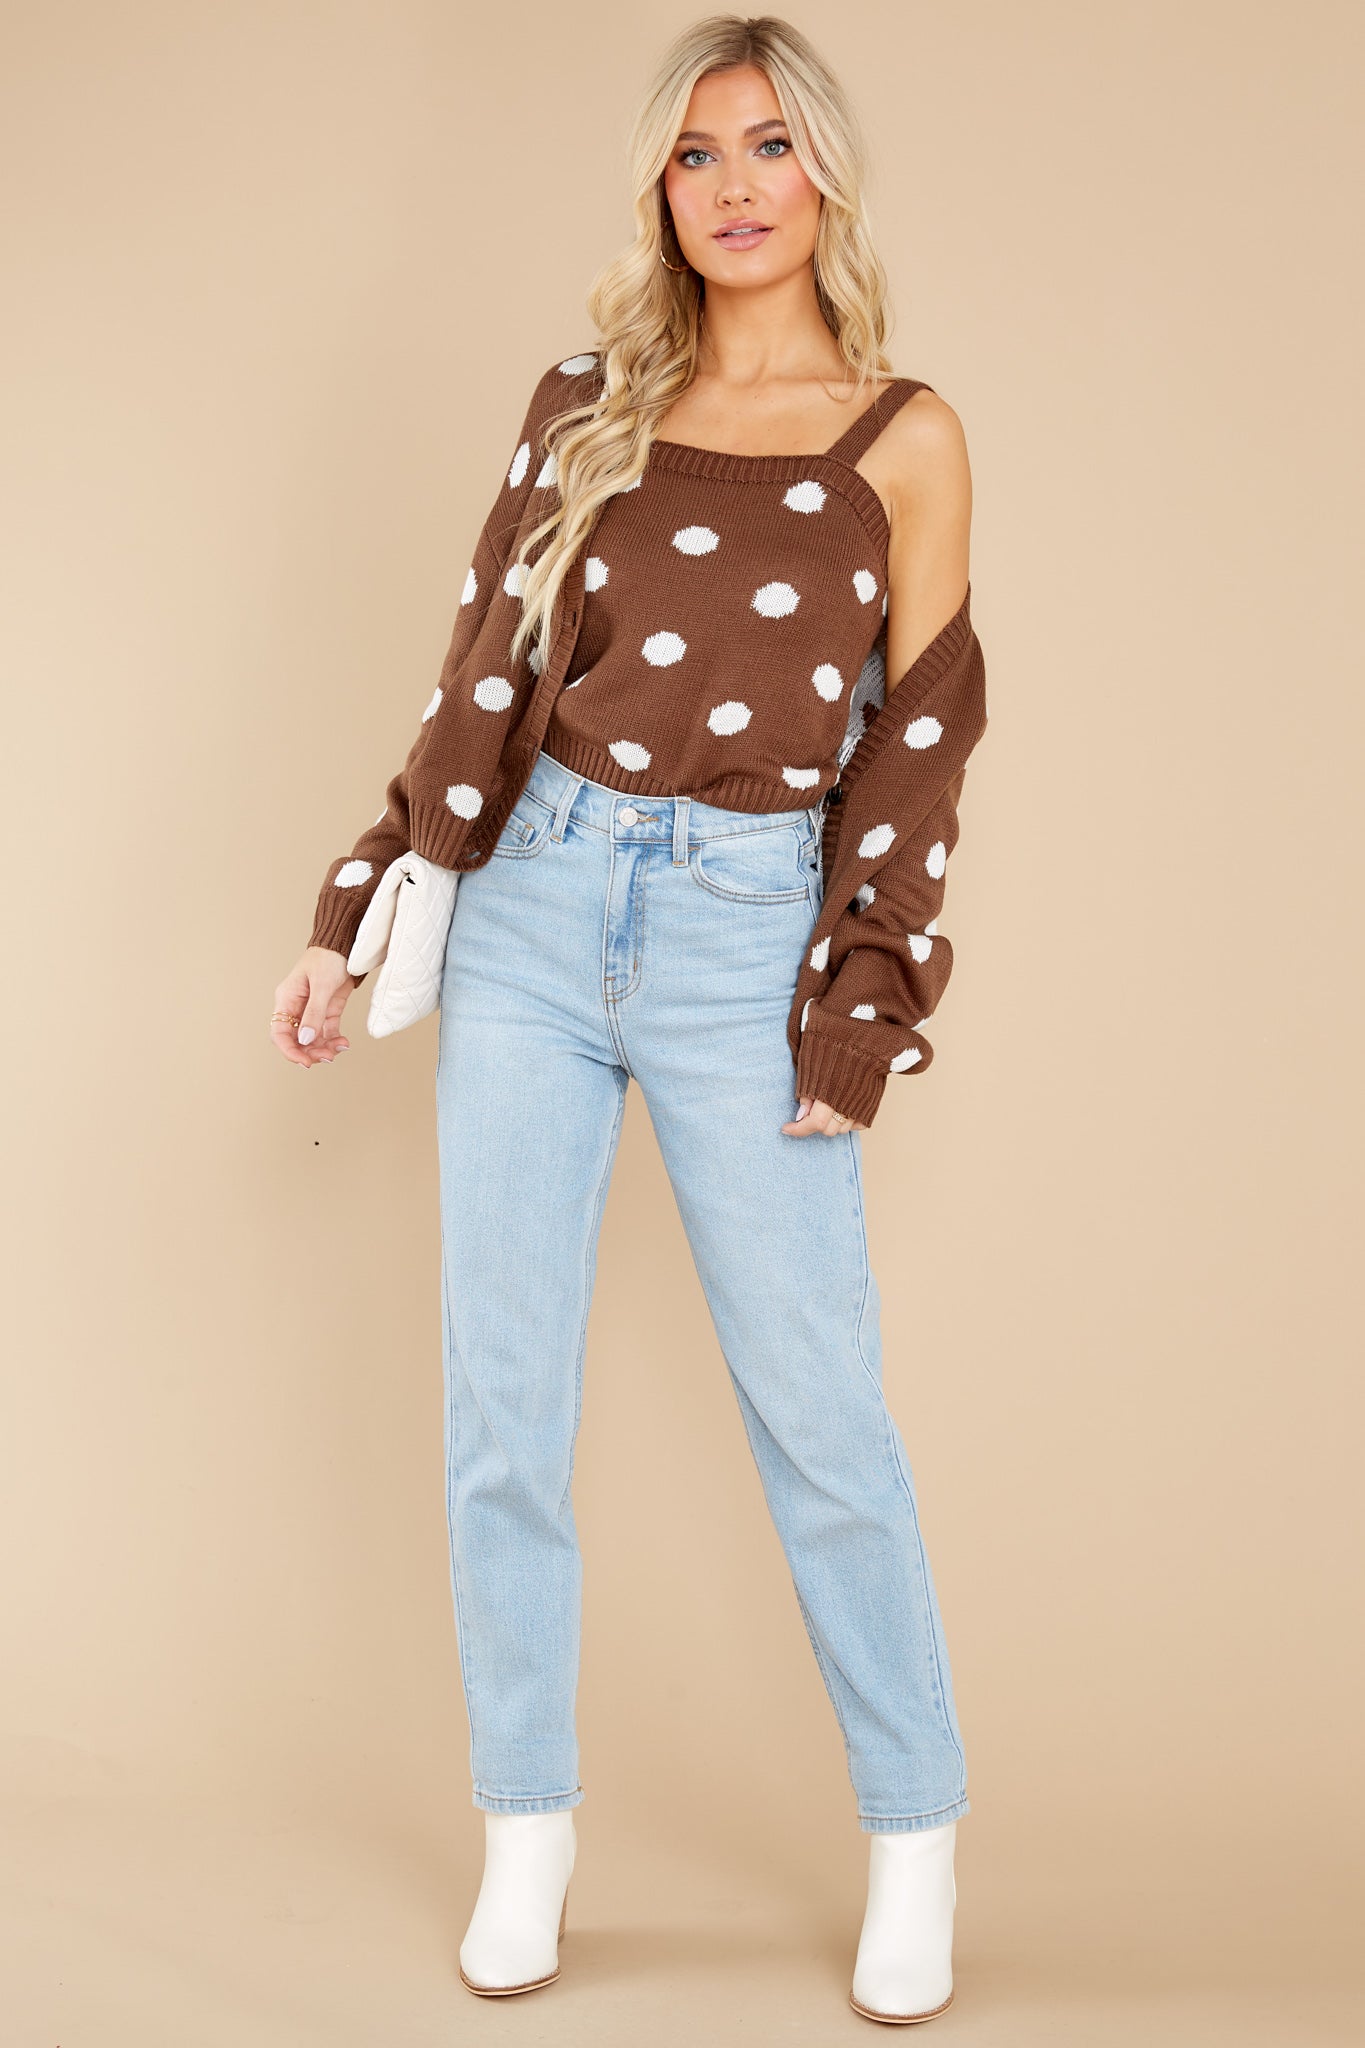 Caught My Attention Cocoa Polka Dot Cardigan